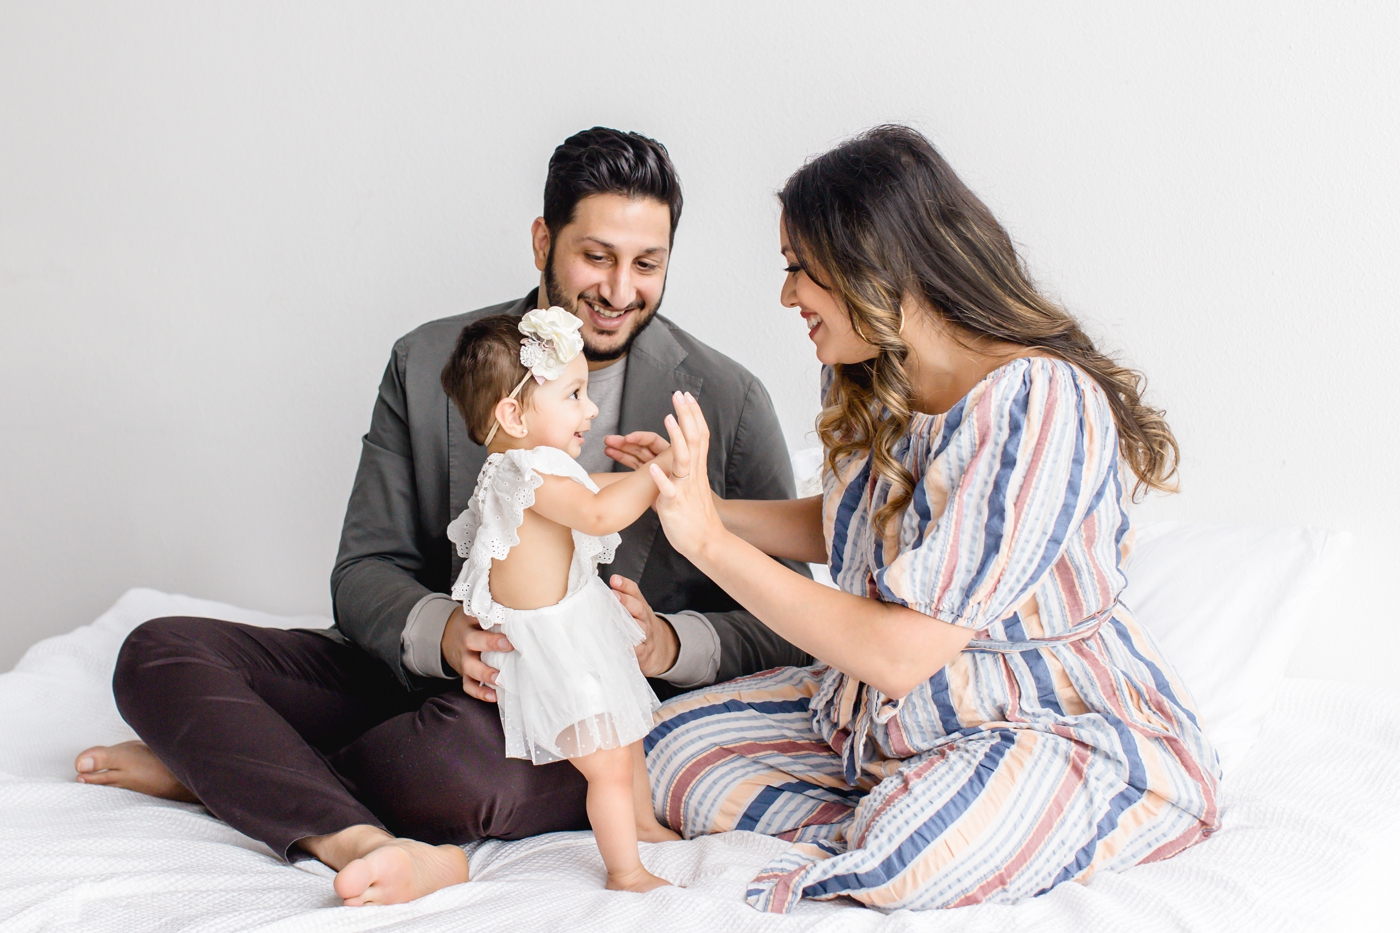 Sweet candid photo of parents playing with baby girl during milestone session. Photo by Cedar Park family photographer, Sana Ahmed Photography.